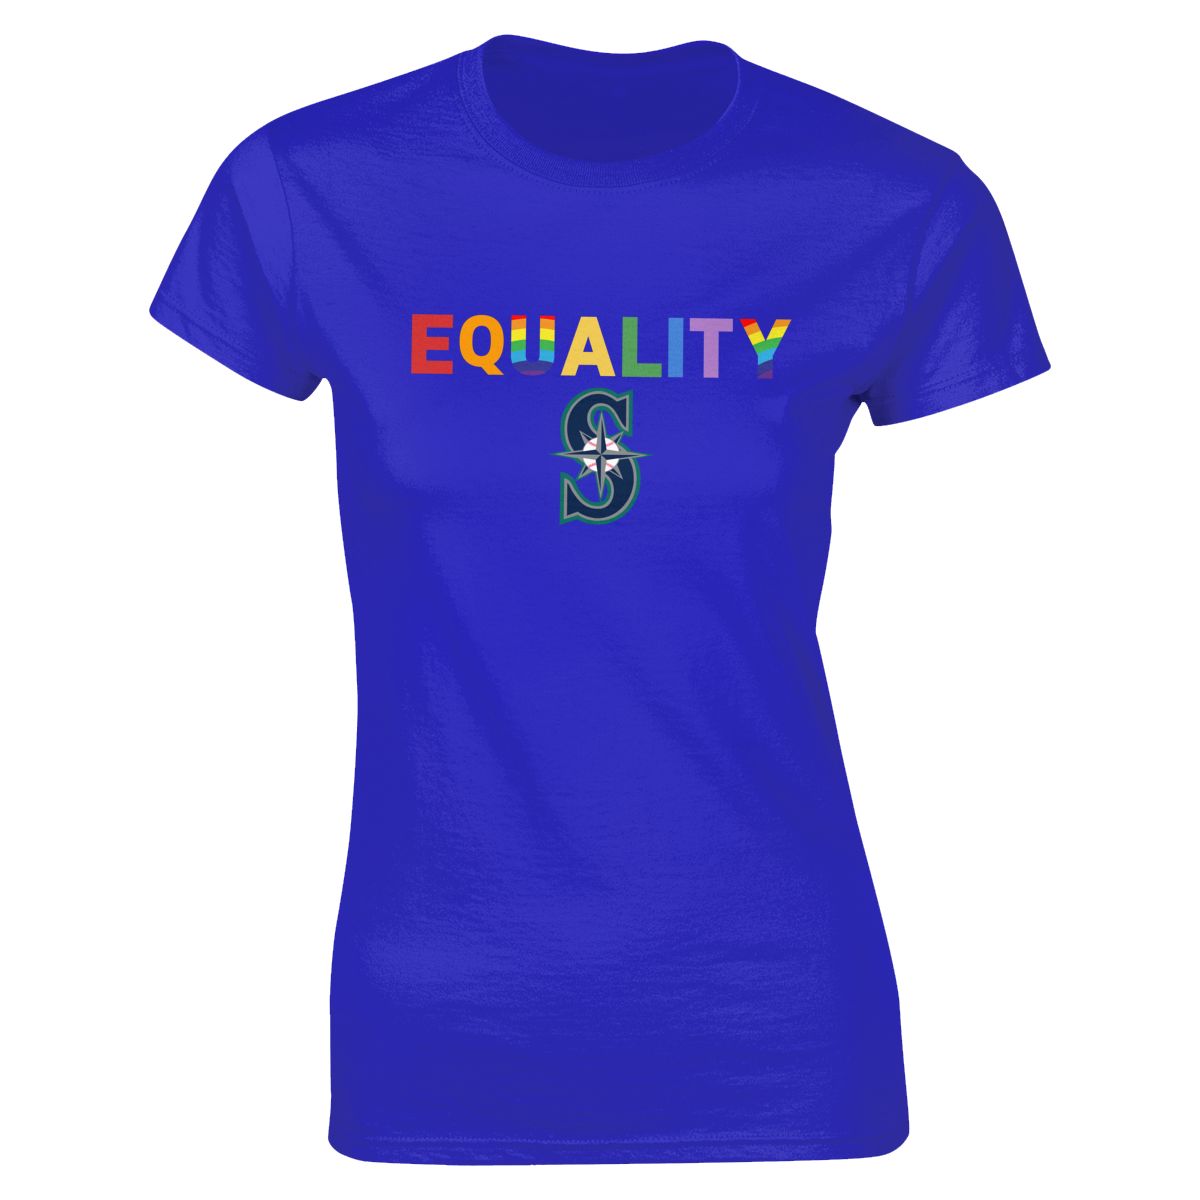 Seattle Mariners Rainbow Equality Pride Women's Classic-Fit T-Shirt